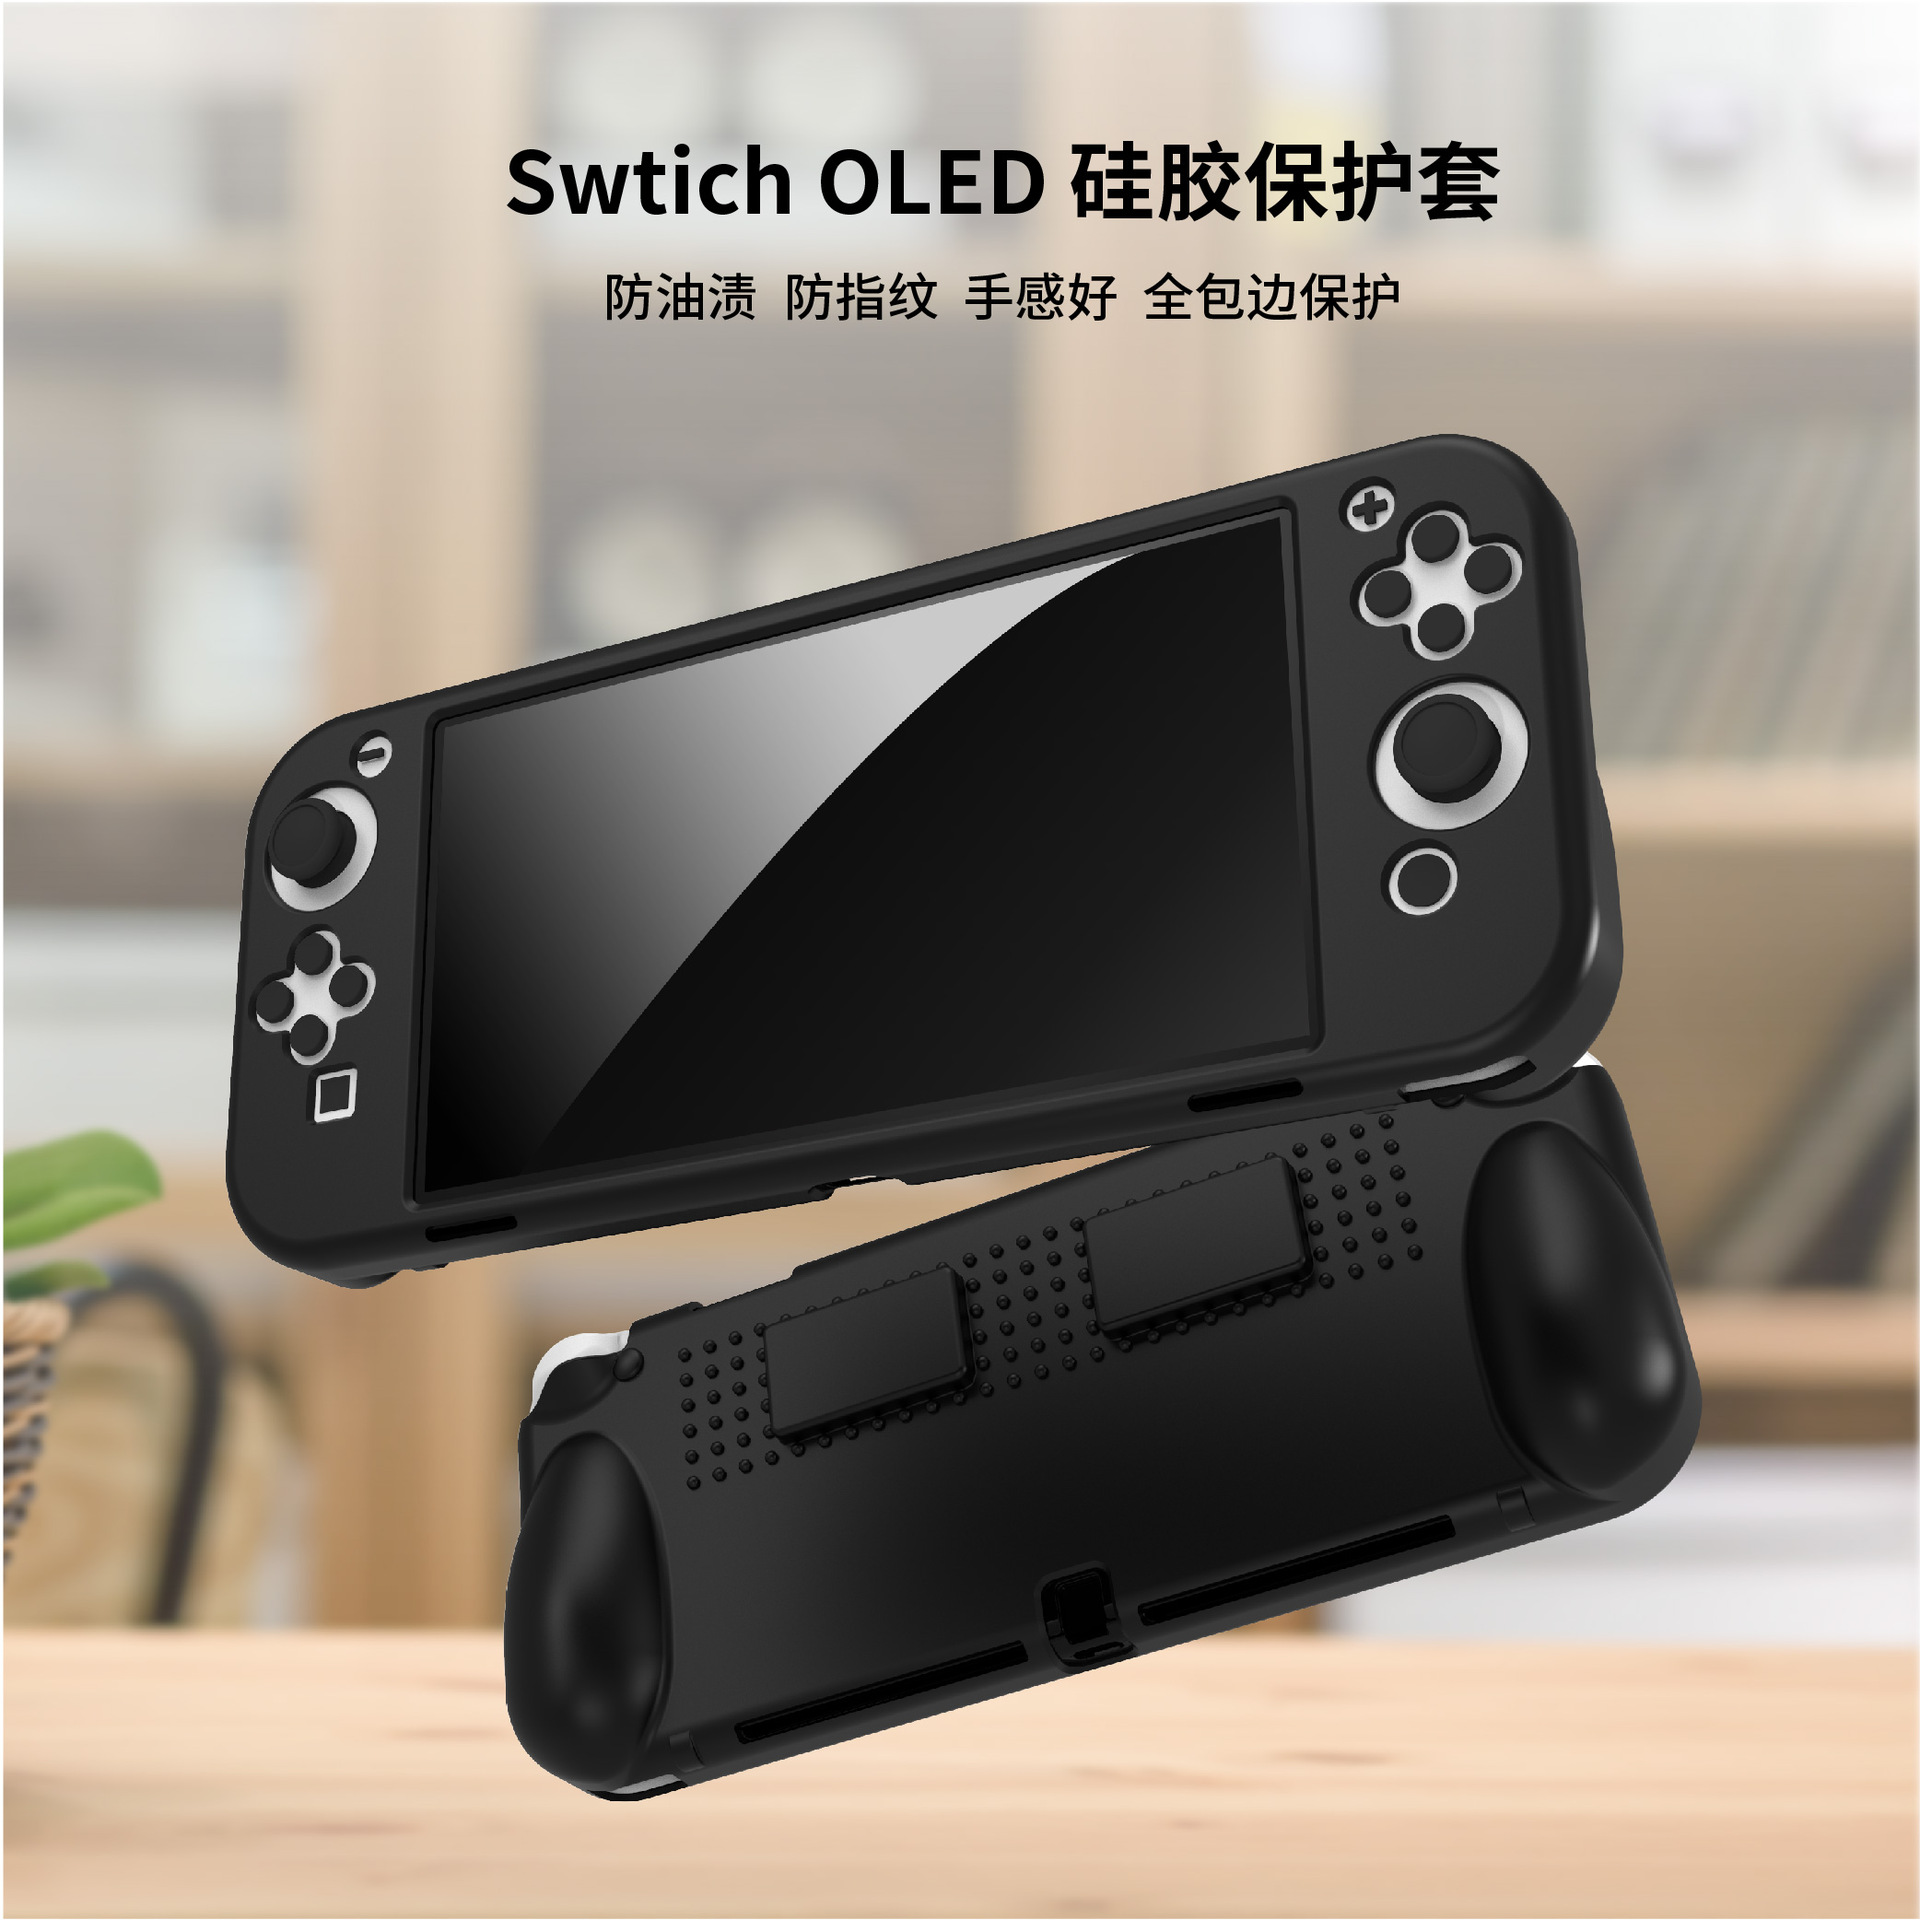 Switch OLED Host Silicone Protective Cover Switch OLED All-Inclusive Silicon Case with Grip Card Slot Design